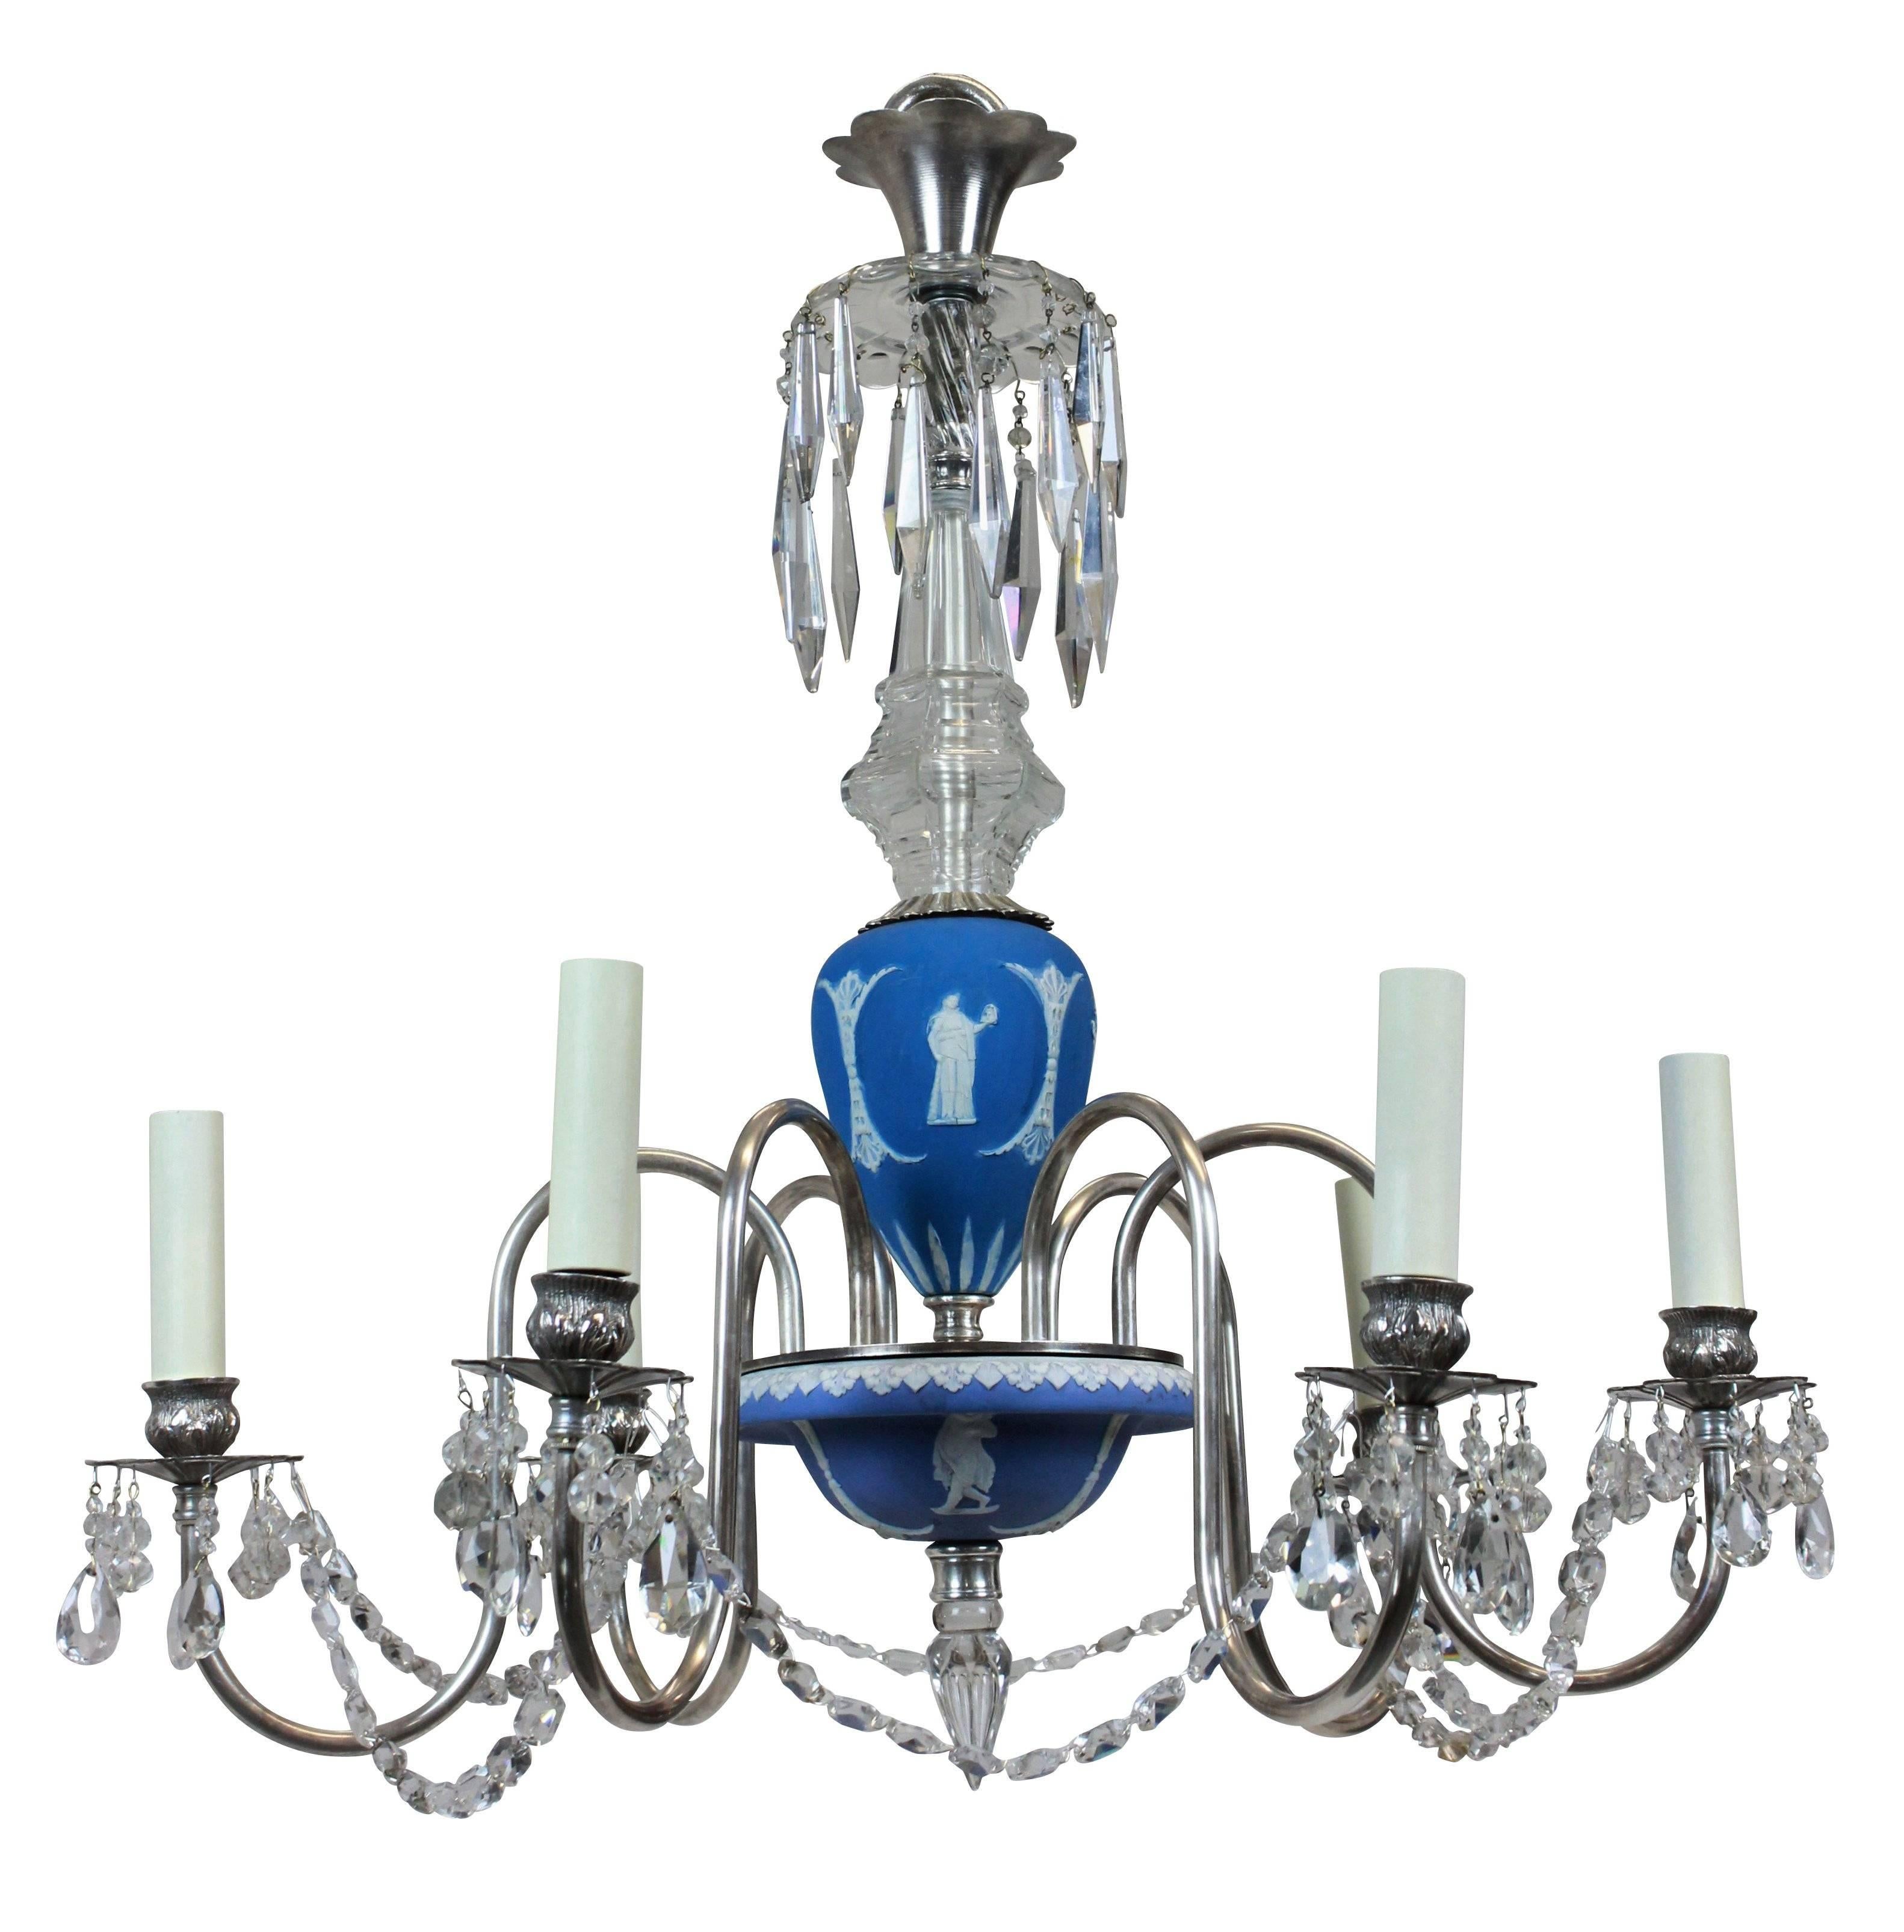 A pair of English Wedgwood chandeliers with silver and cut-glass, each of six arms.

